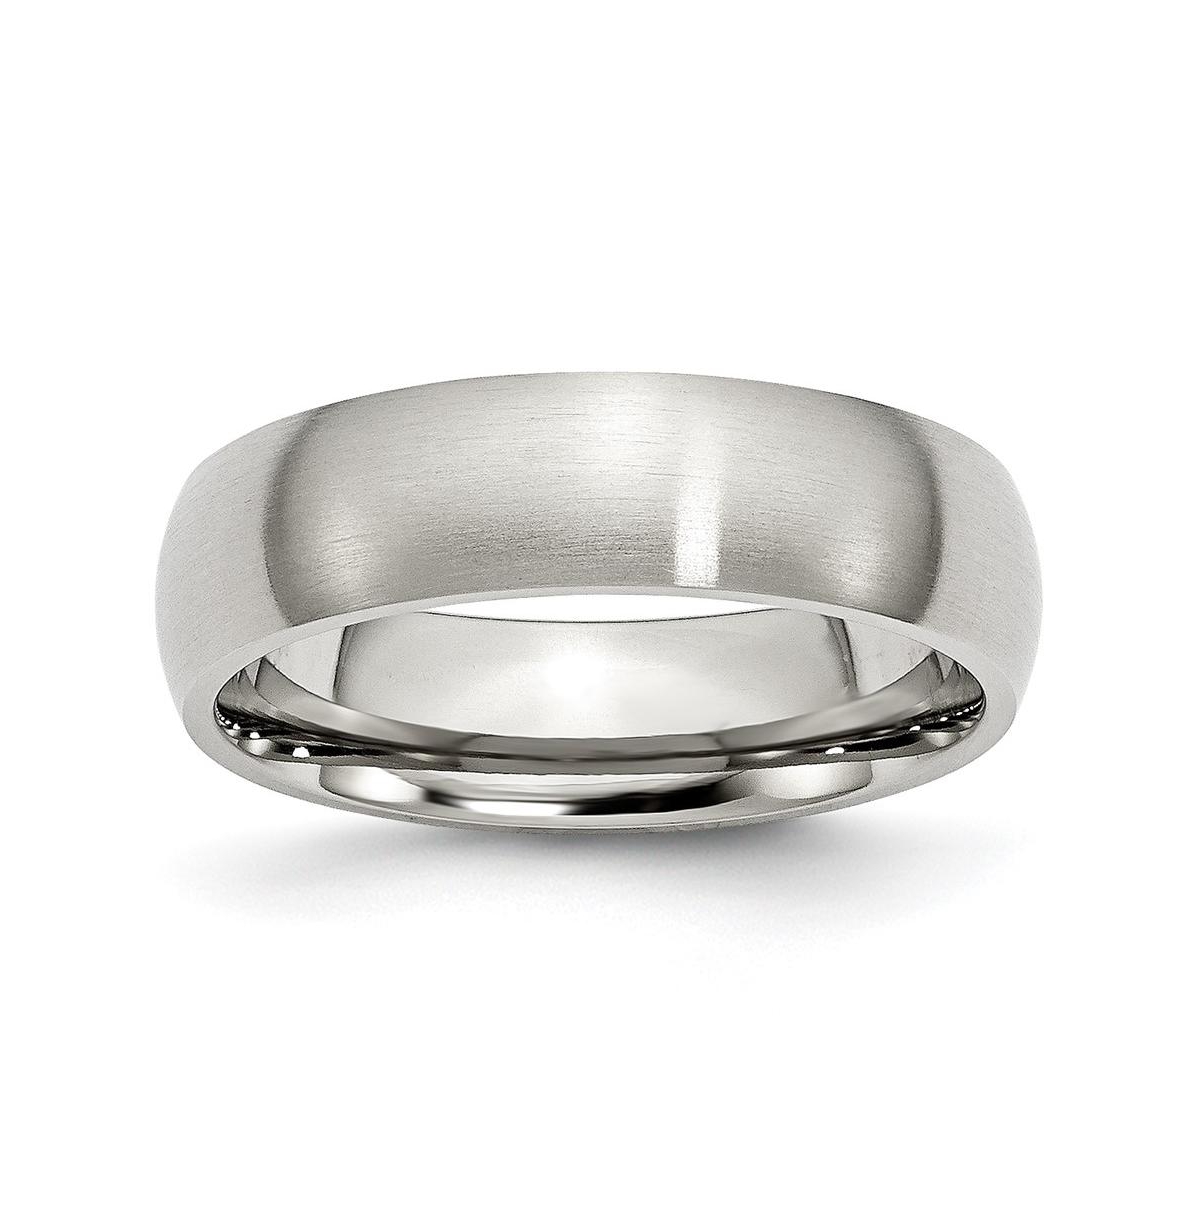 Stainless Steel Brushed 6mm Half Round Band Ring - Silver